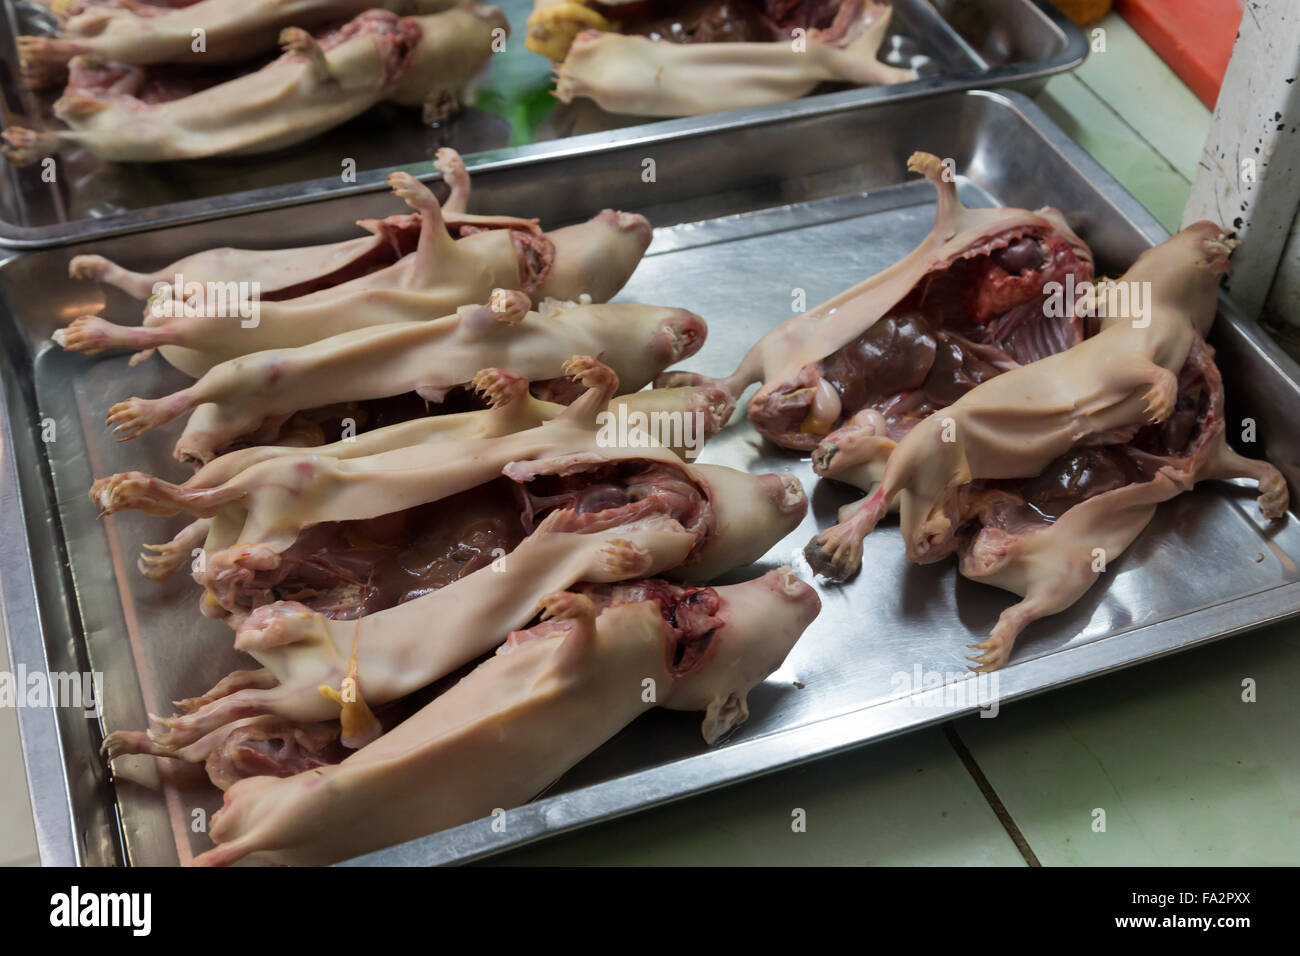 Photograph of slaughtered guinea pigs on the local market in Huaraz, Peru. Stock Photo